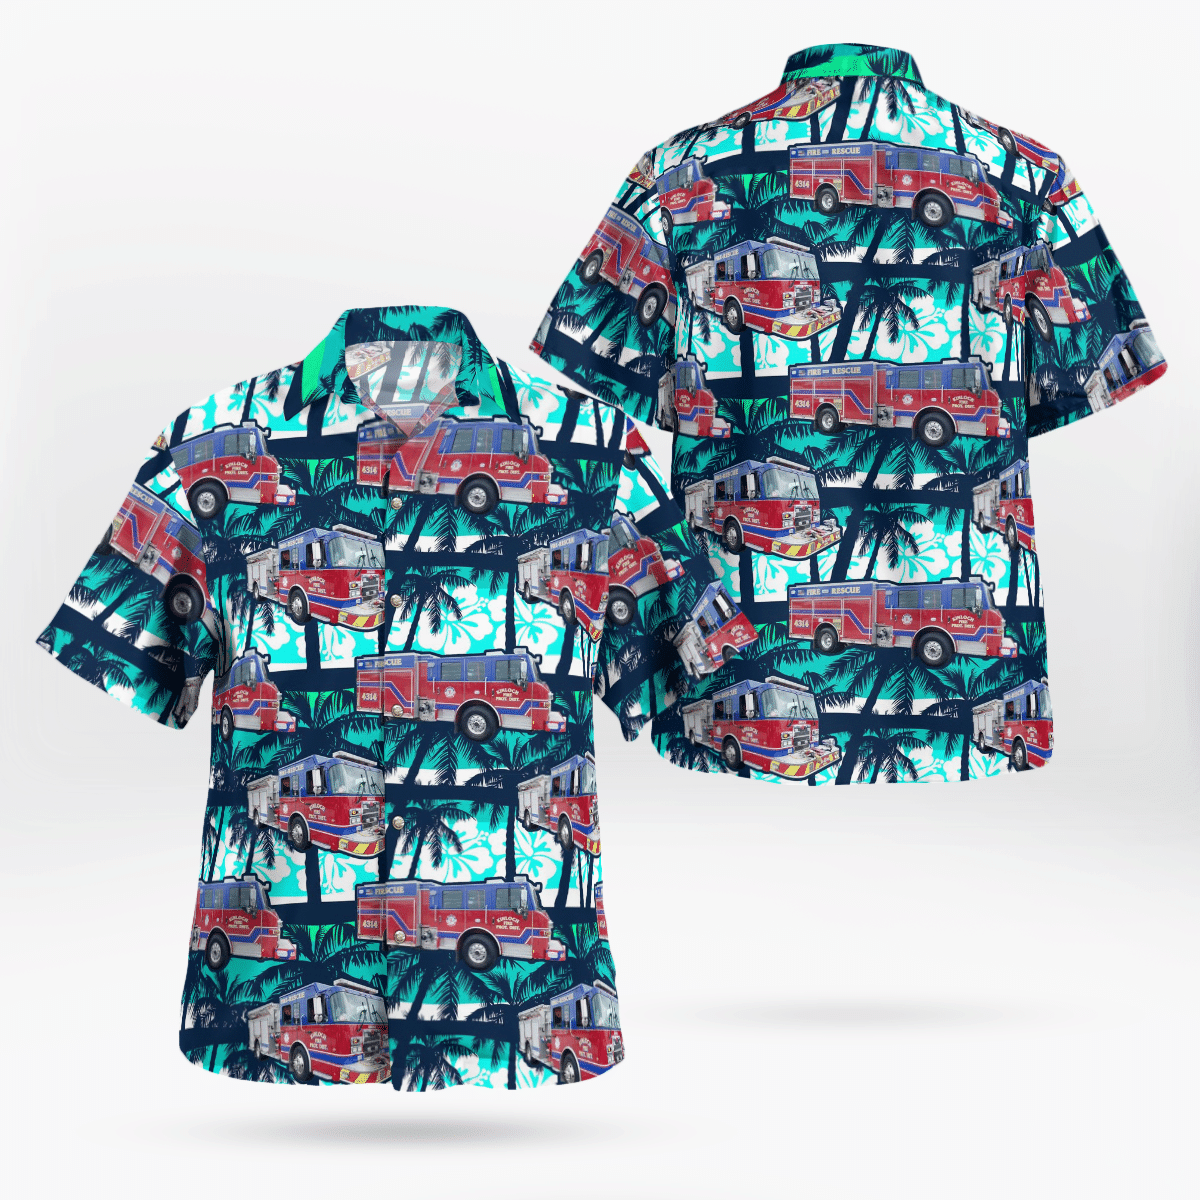 If you want to be noticed, wear These Trendy Hawaiian Shirt 81